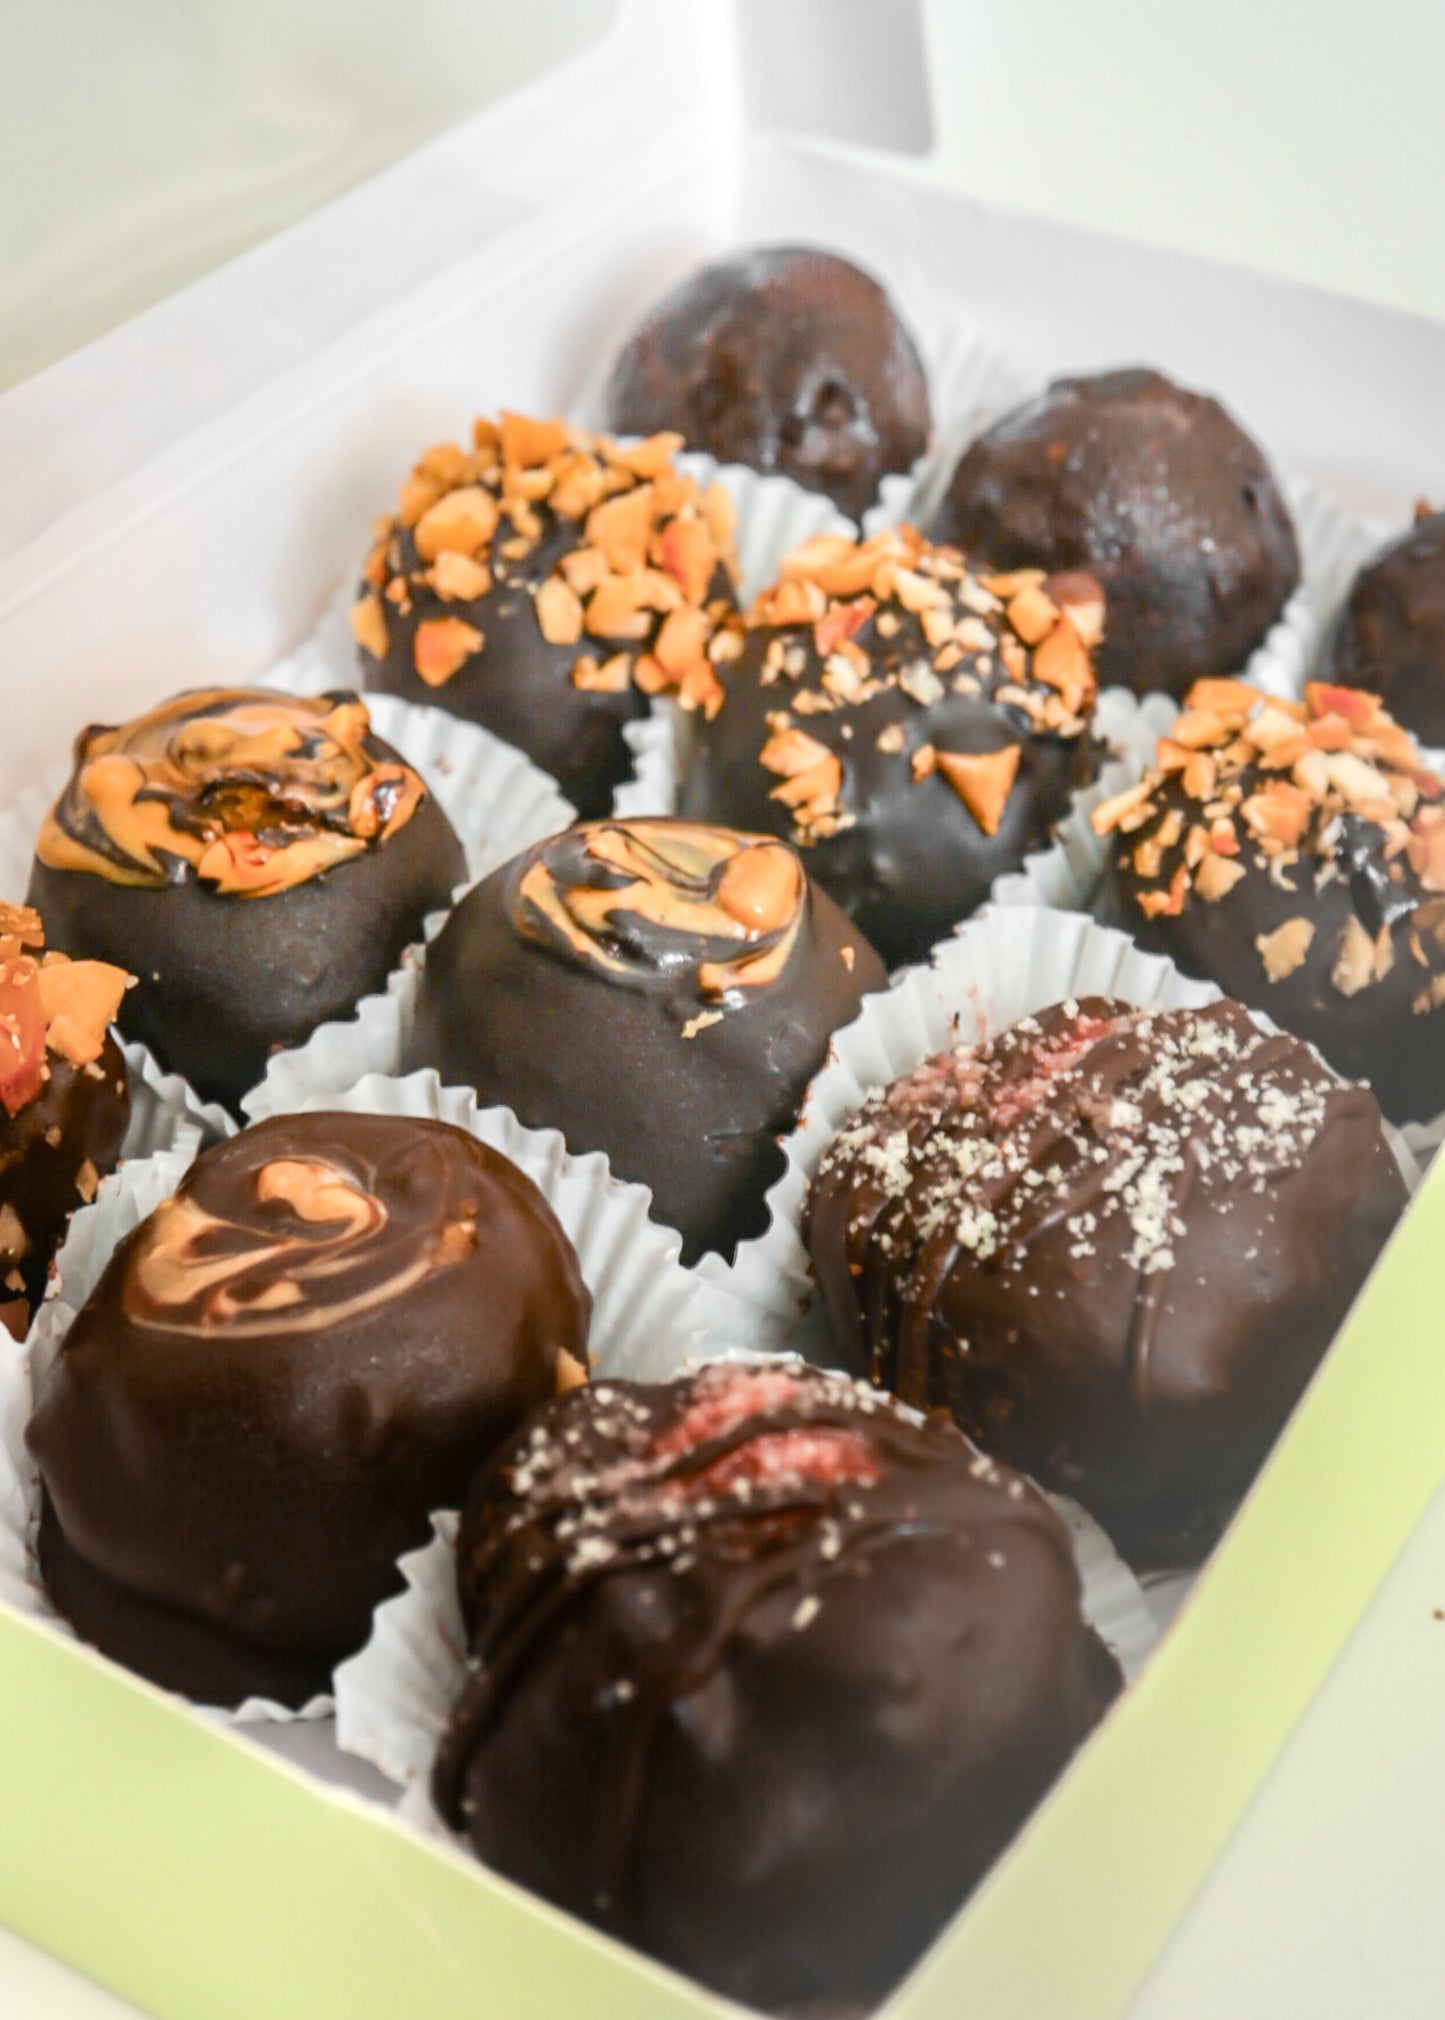 Best Seller: Assorted Truffles - Mixed of Pea Protein and Cake Truffles (3-24 Pieces)